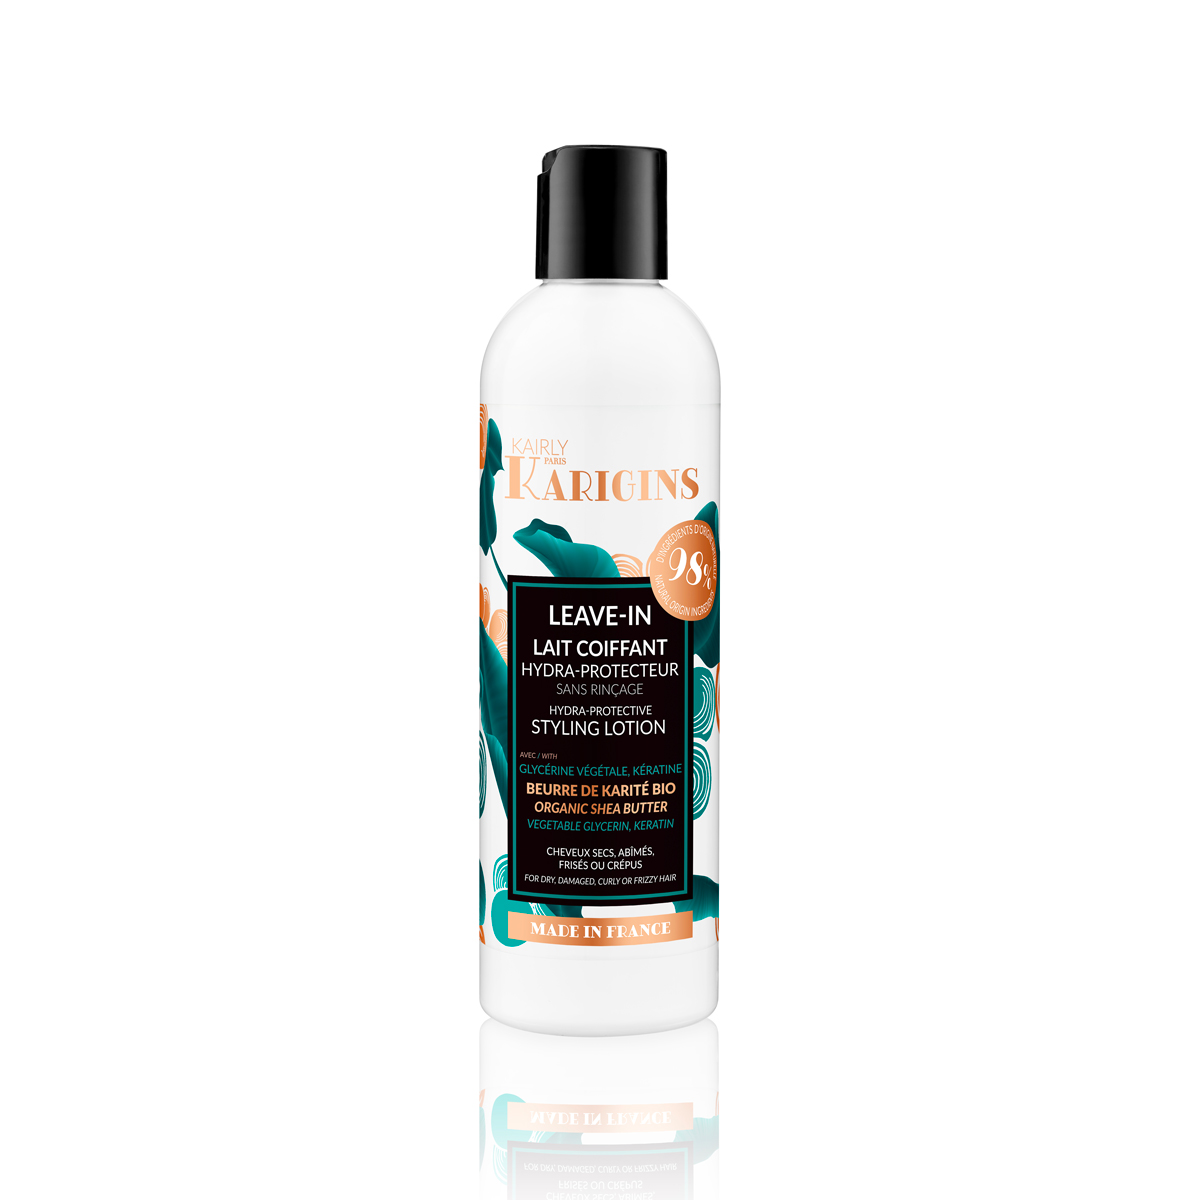 Leave-in Hydra Protective Styling Lotion | KARIGINS